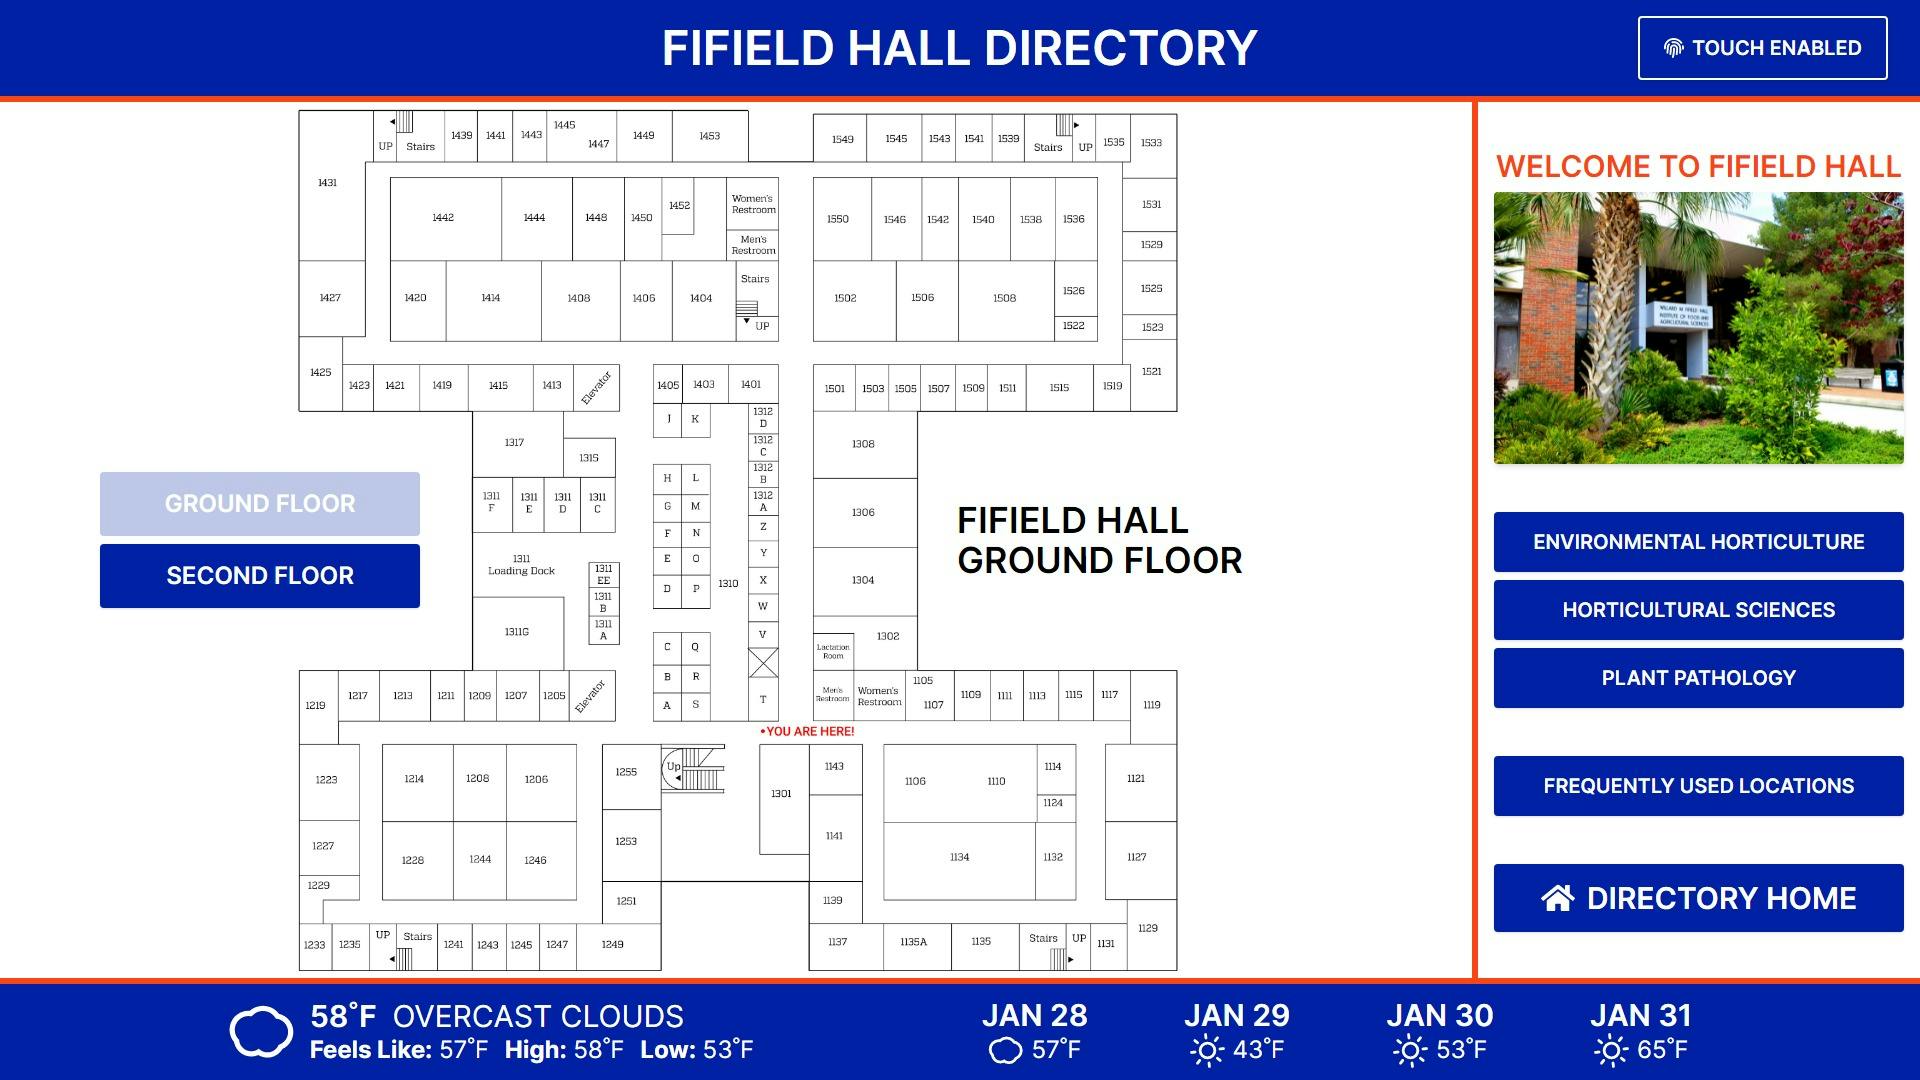 Fifield Hall Directory